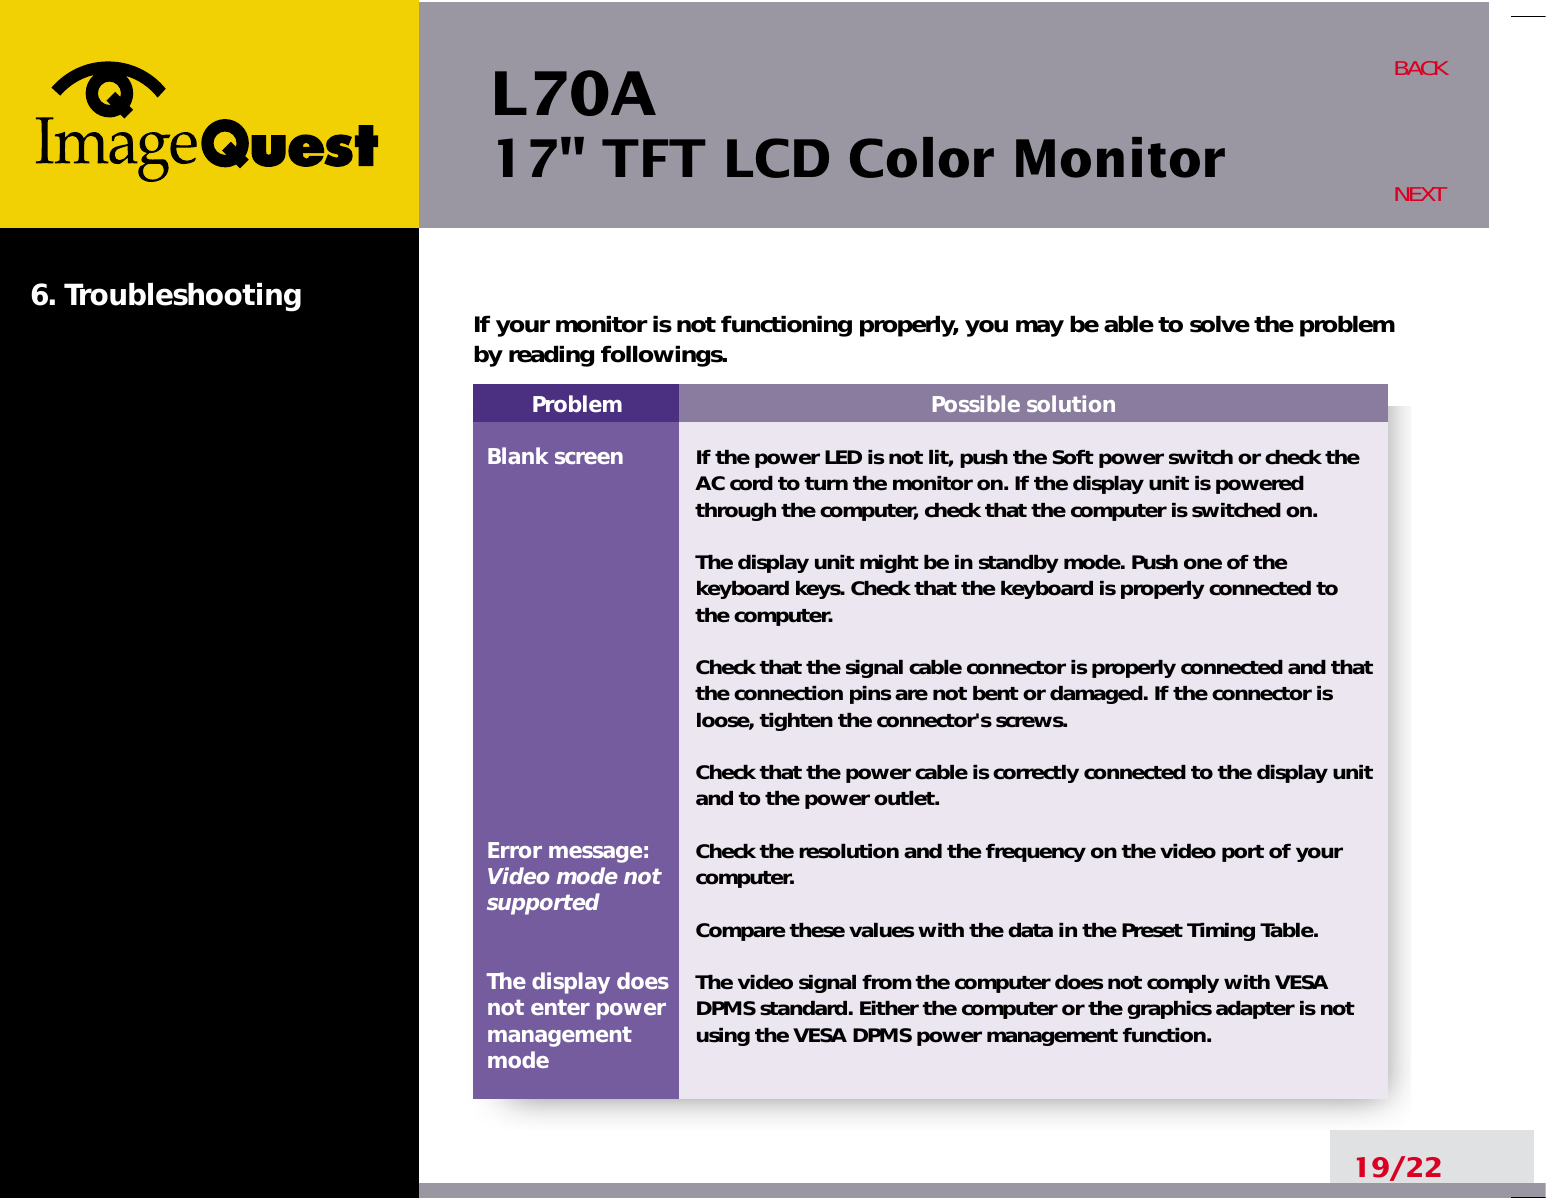 L70A17&quot; TFT LCD Color Monitor6. Troubleshooting19/22BACKNEXTProblemBlank screenError message:Video mode notsupportedThe display does not enter power managementmodePossible solutionIf the power LED is not lit, push the Soft power switch or check theAC cord to turn the monitor on. If the display unit is poweredthrough the computer, check that the computer is switched on.The display unit might be in standby mode. Push one of thekeyboard keys. Check that the keyboard is properly connected tothe computer.Check that the signal cable connector is properly connected and thatthe connection pins are not bent or damaged. If the connector isloose, tighten the connector&apos;s screws.Check that the power cable is correctly connected to the display unitand to the power outlet. Check the resolution and the frequency on the video port of yourcomputer.Compare these values with the data in the Preset Timing Table.The video signal from the computer does not comply with VESADPMS standard. Either the computer or the graphics adapter is notusing the VESA DPMS power management function.If your monitor is not functioning properly, you may be able to solve the problemby reading followings.